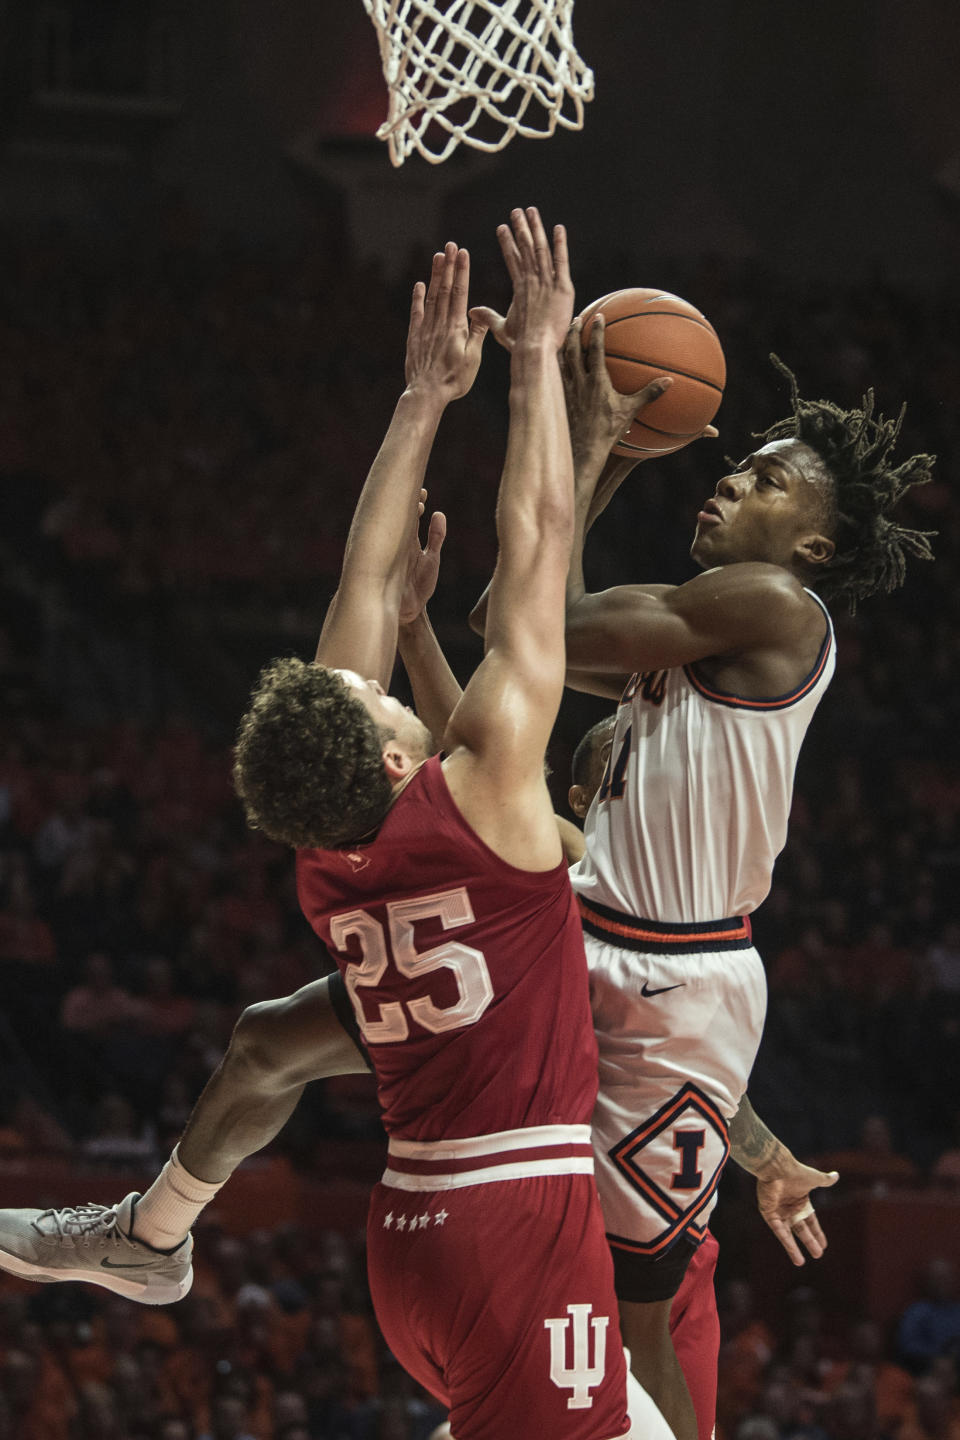 Illinois' Ayo Dosunmu (11) goes up to shoot as Indiana's Race Thompson (25) defends in the first half of an NCAA college basketball game Sunday, March 1, 2020, in Champaign, Ill. (AP Photo/Holly Hart)